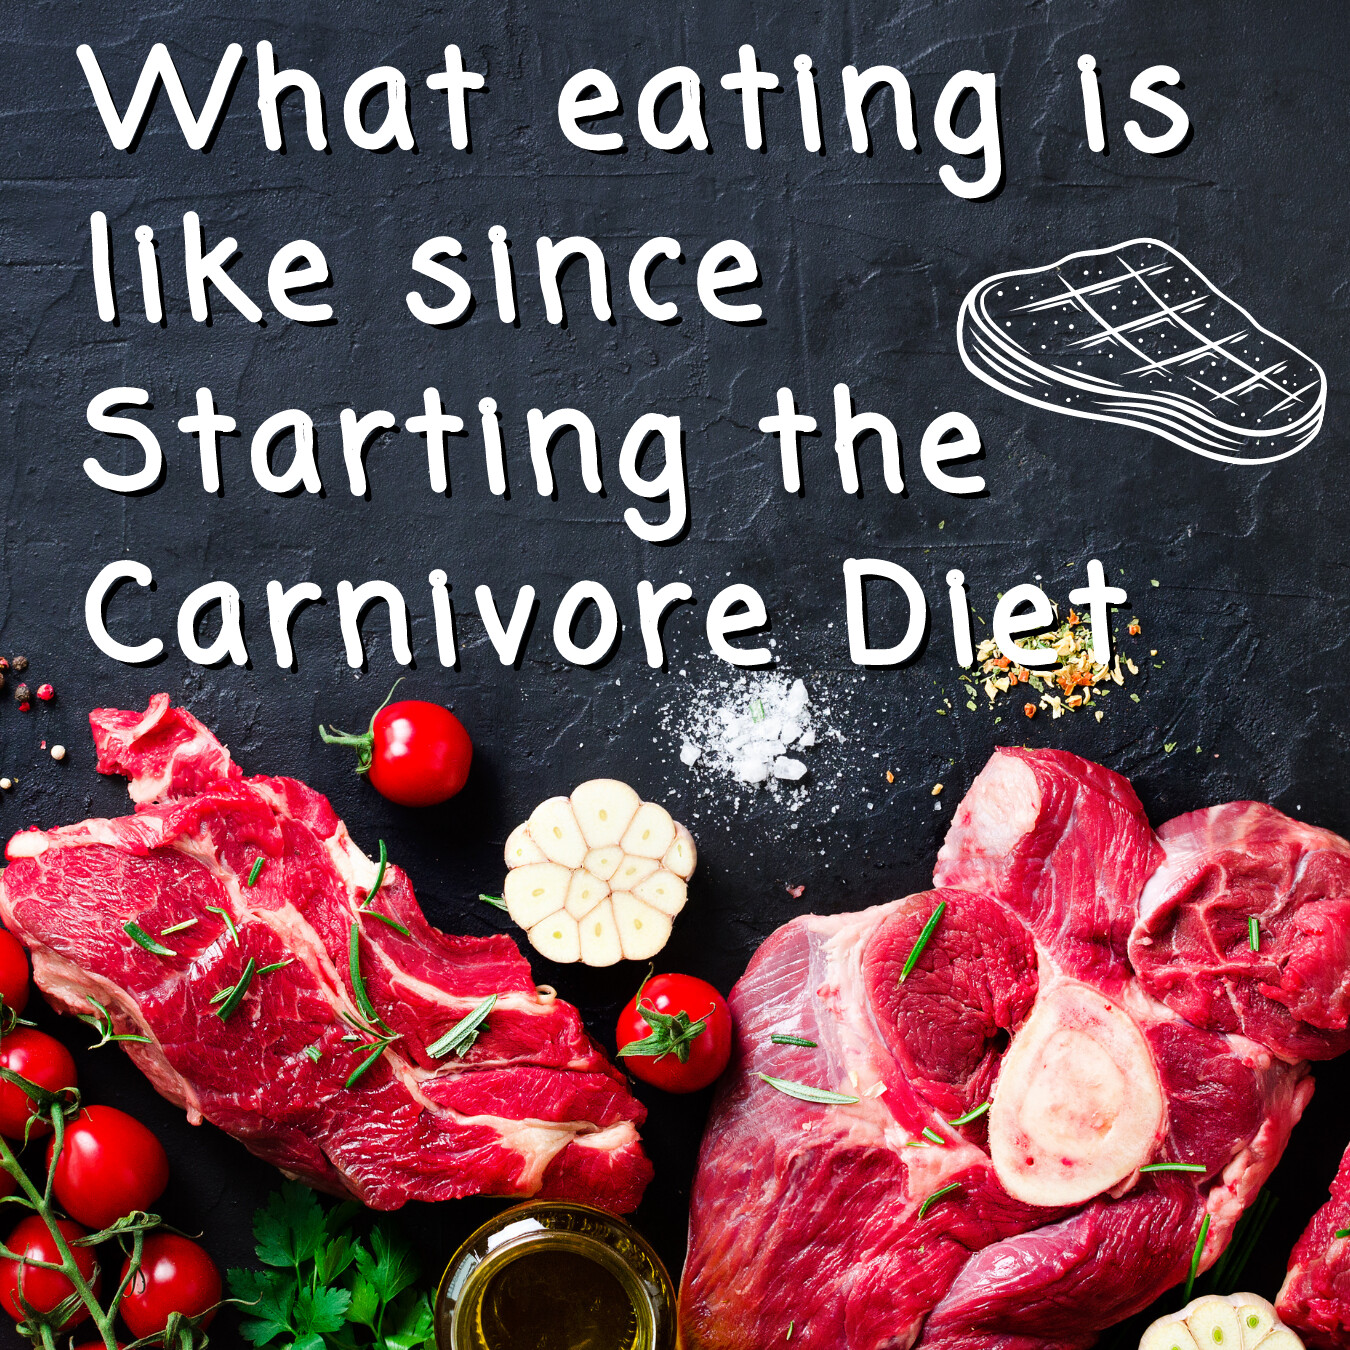 What Eating is  like since starting the Carnivore diet! 